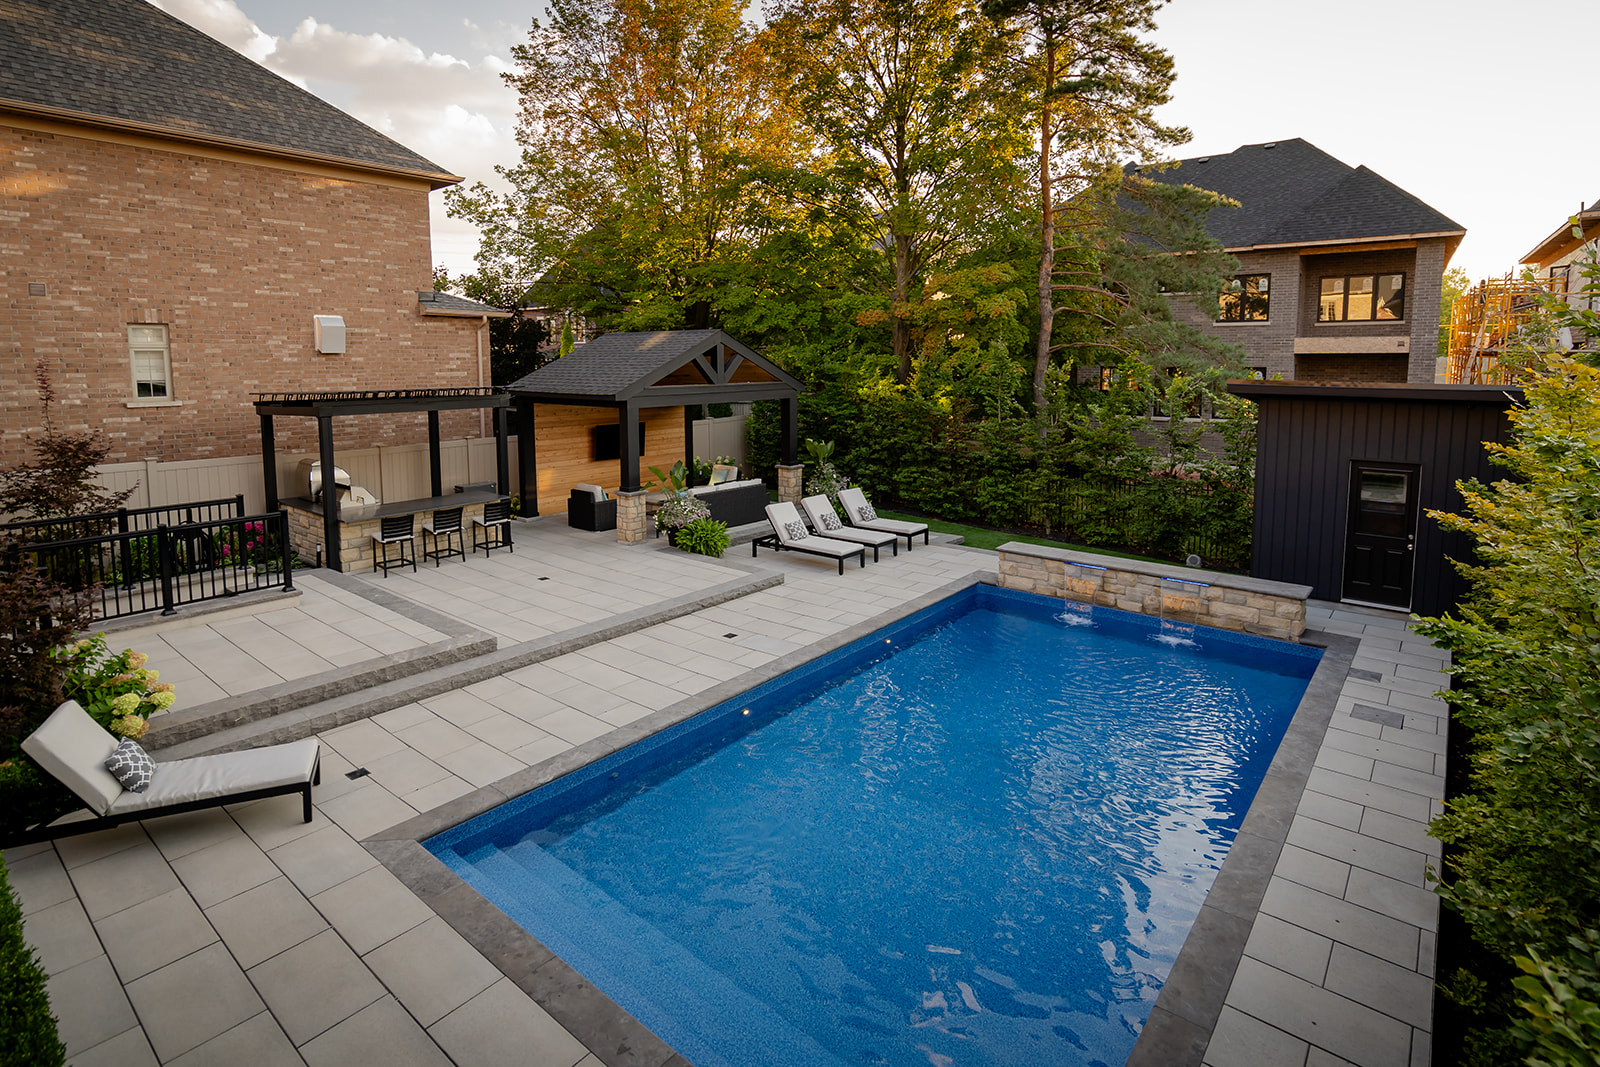 An inground pool with patio stones surrounding it.